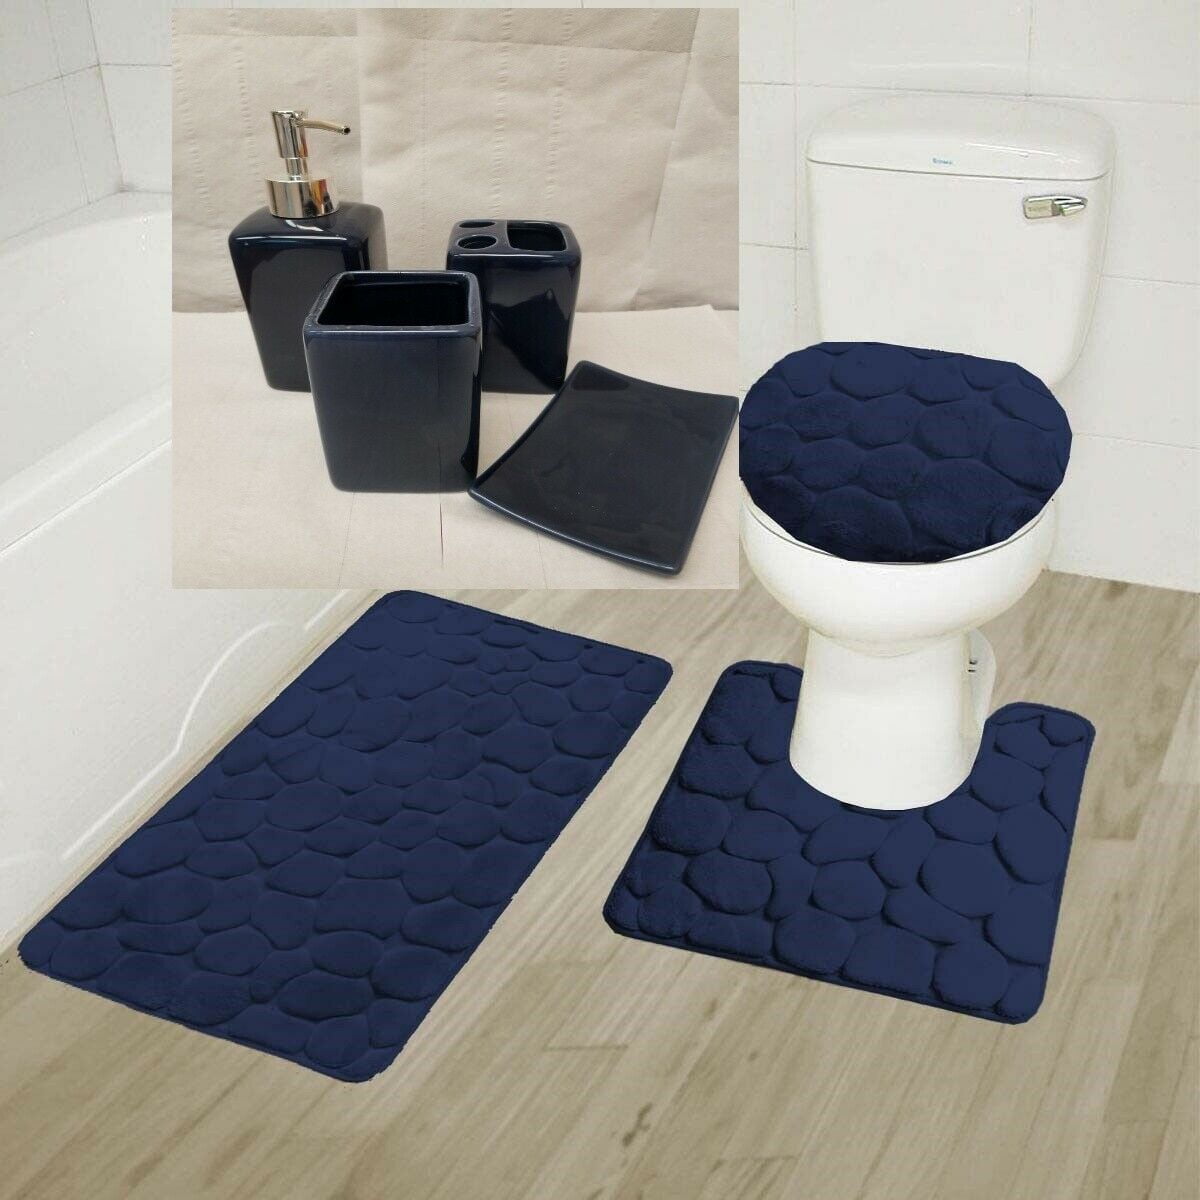 3 Piece Bathroom Anti-Skid Pads British Flag Blue Red White National Memory Foam Mat Set Matches Anti-Skid Absorbent Toilet Seat Cover Bath Mat Lid